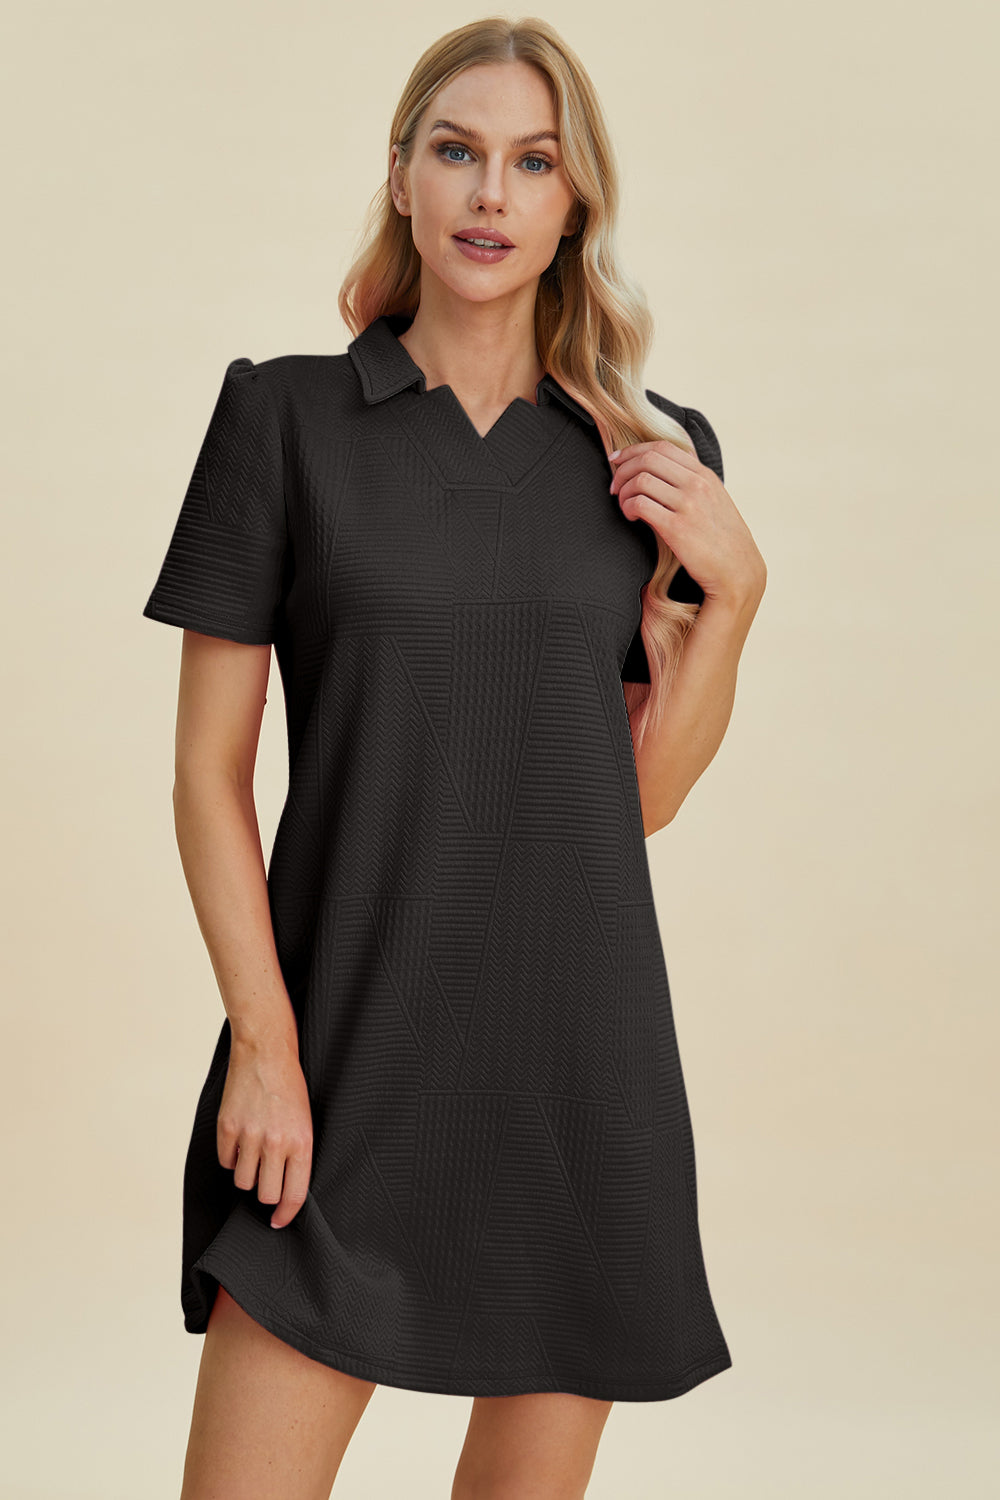 Black textured dress with short sleeves and collar